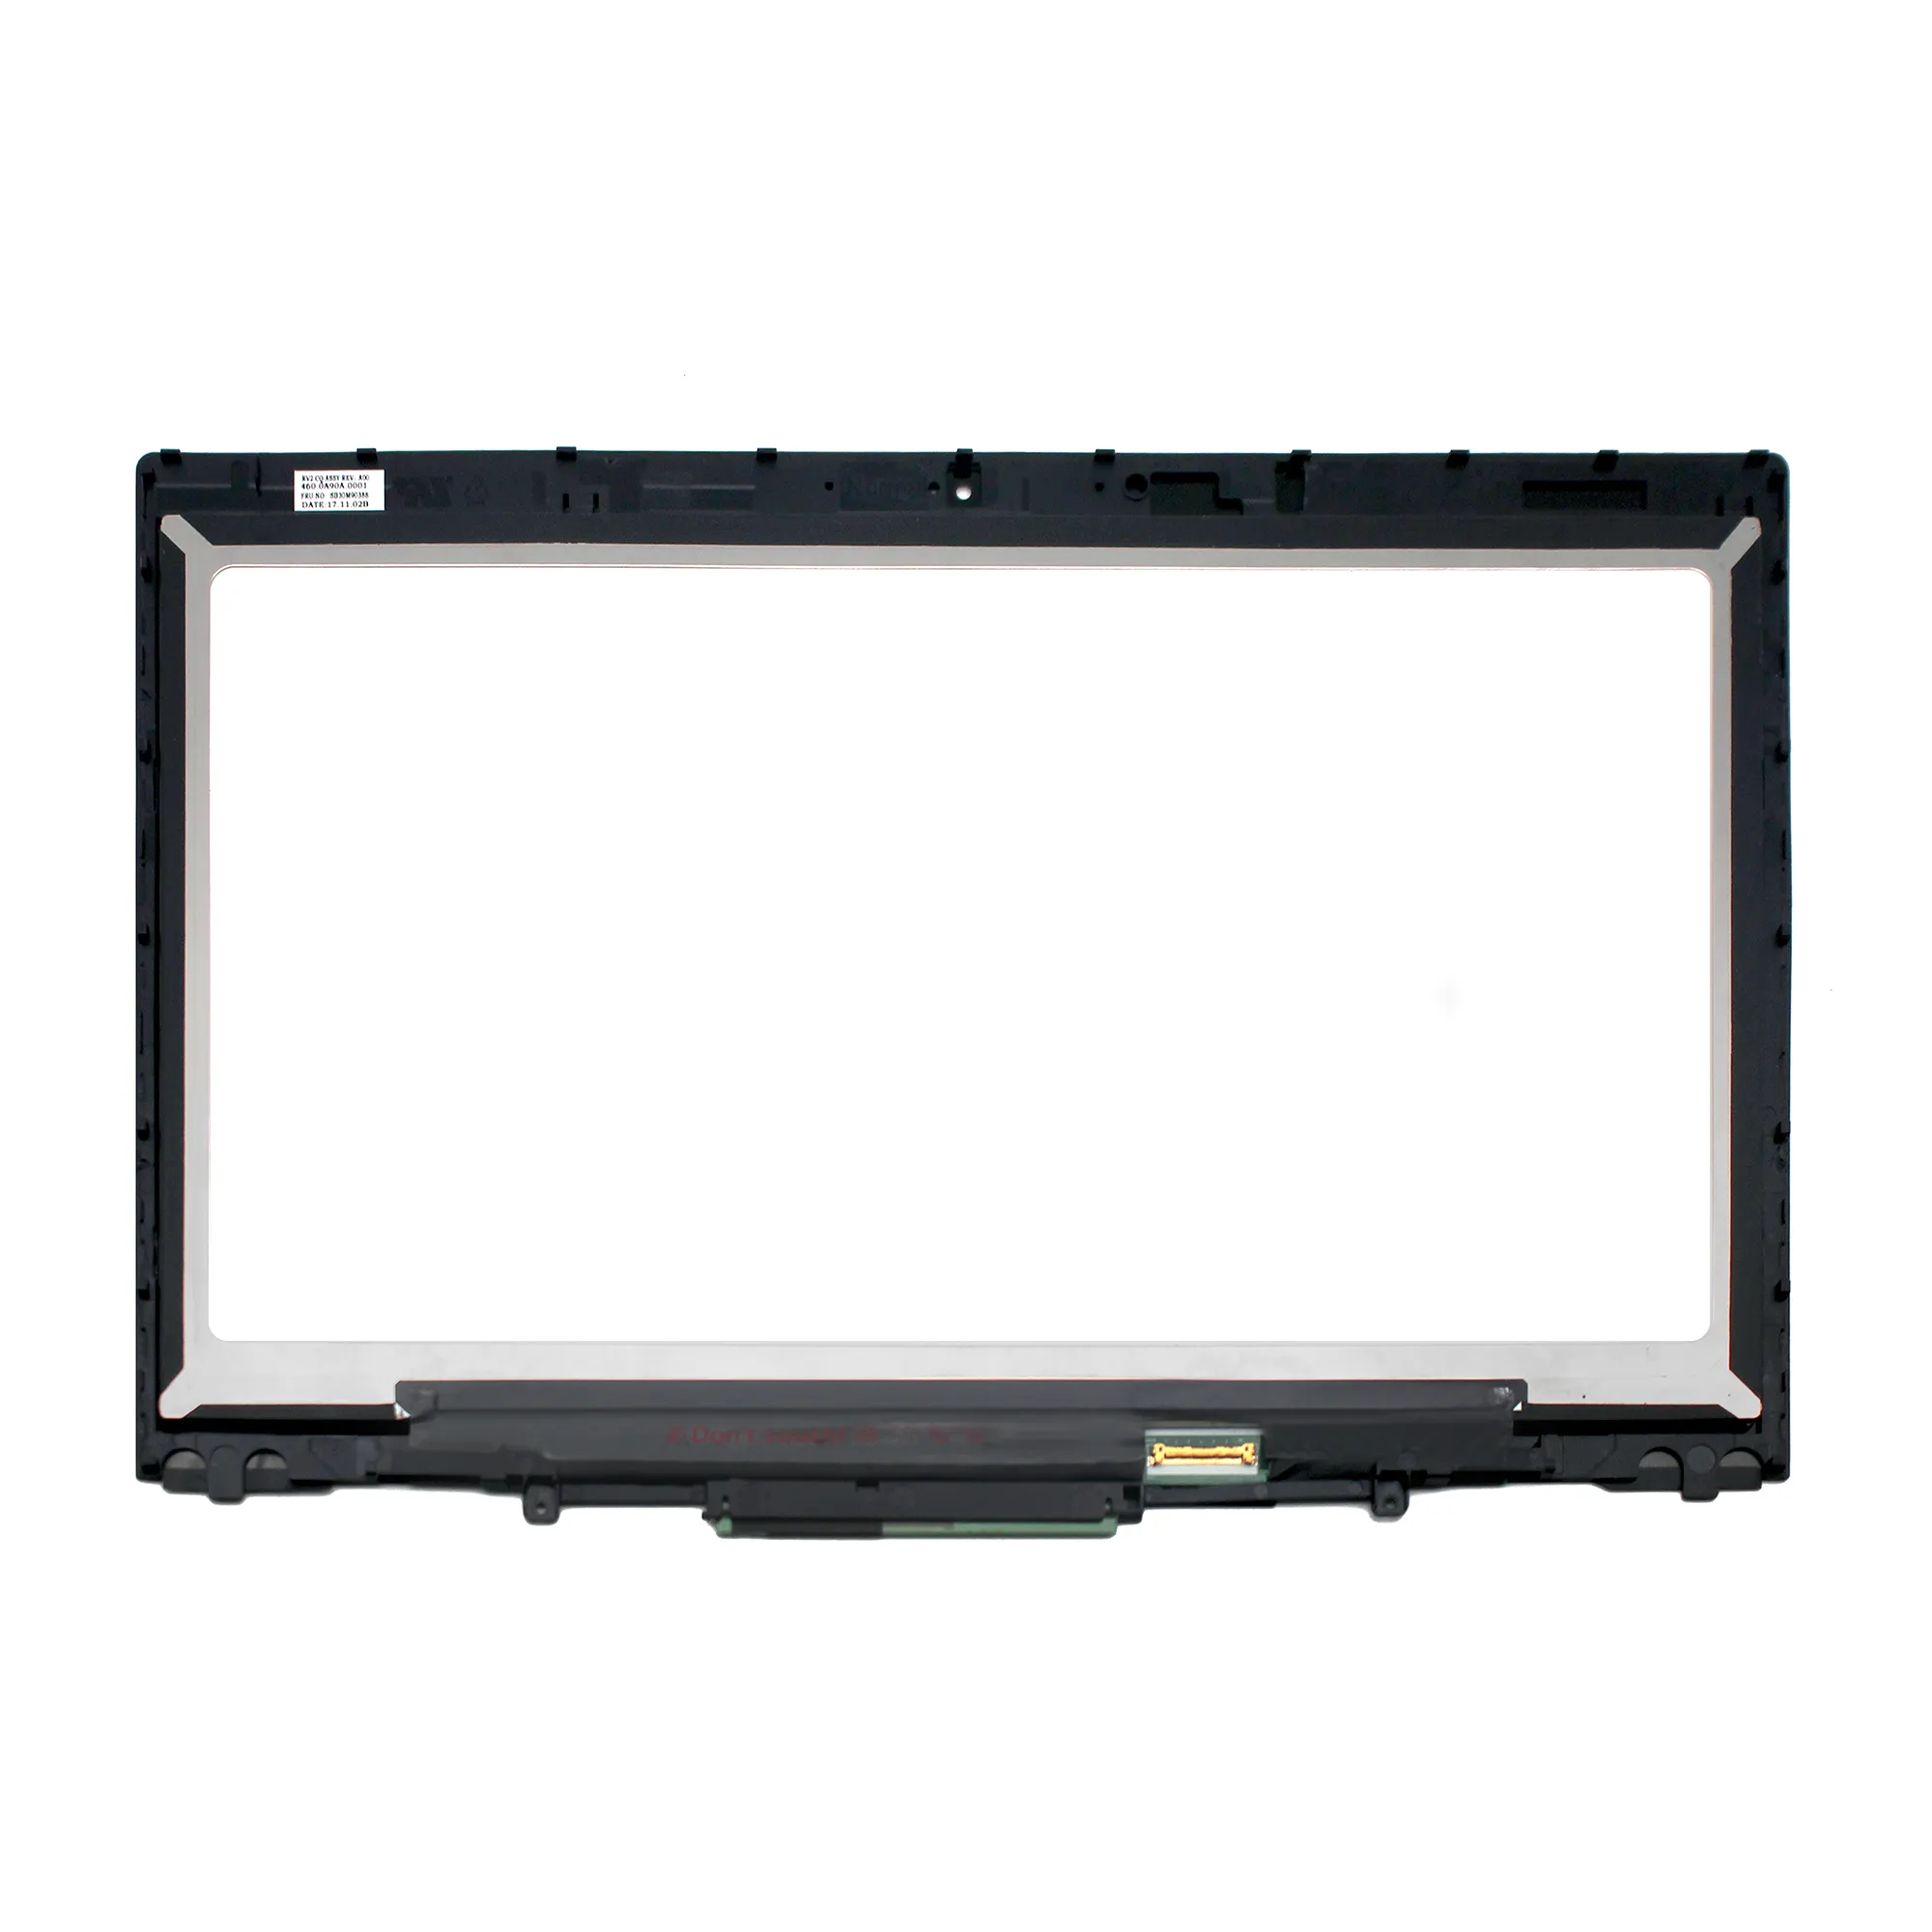 LCD Touch Screen Digitizer Assembly With Bezel For Lenovo ThinkPad X1 Yoga (1st 2nd 3rd Gen) 20FQ 20JD 20JF 20LD 20LF